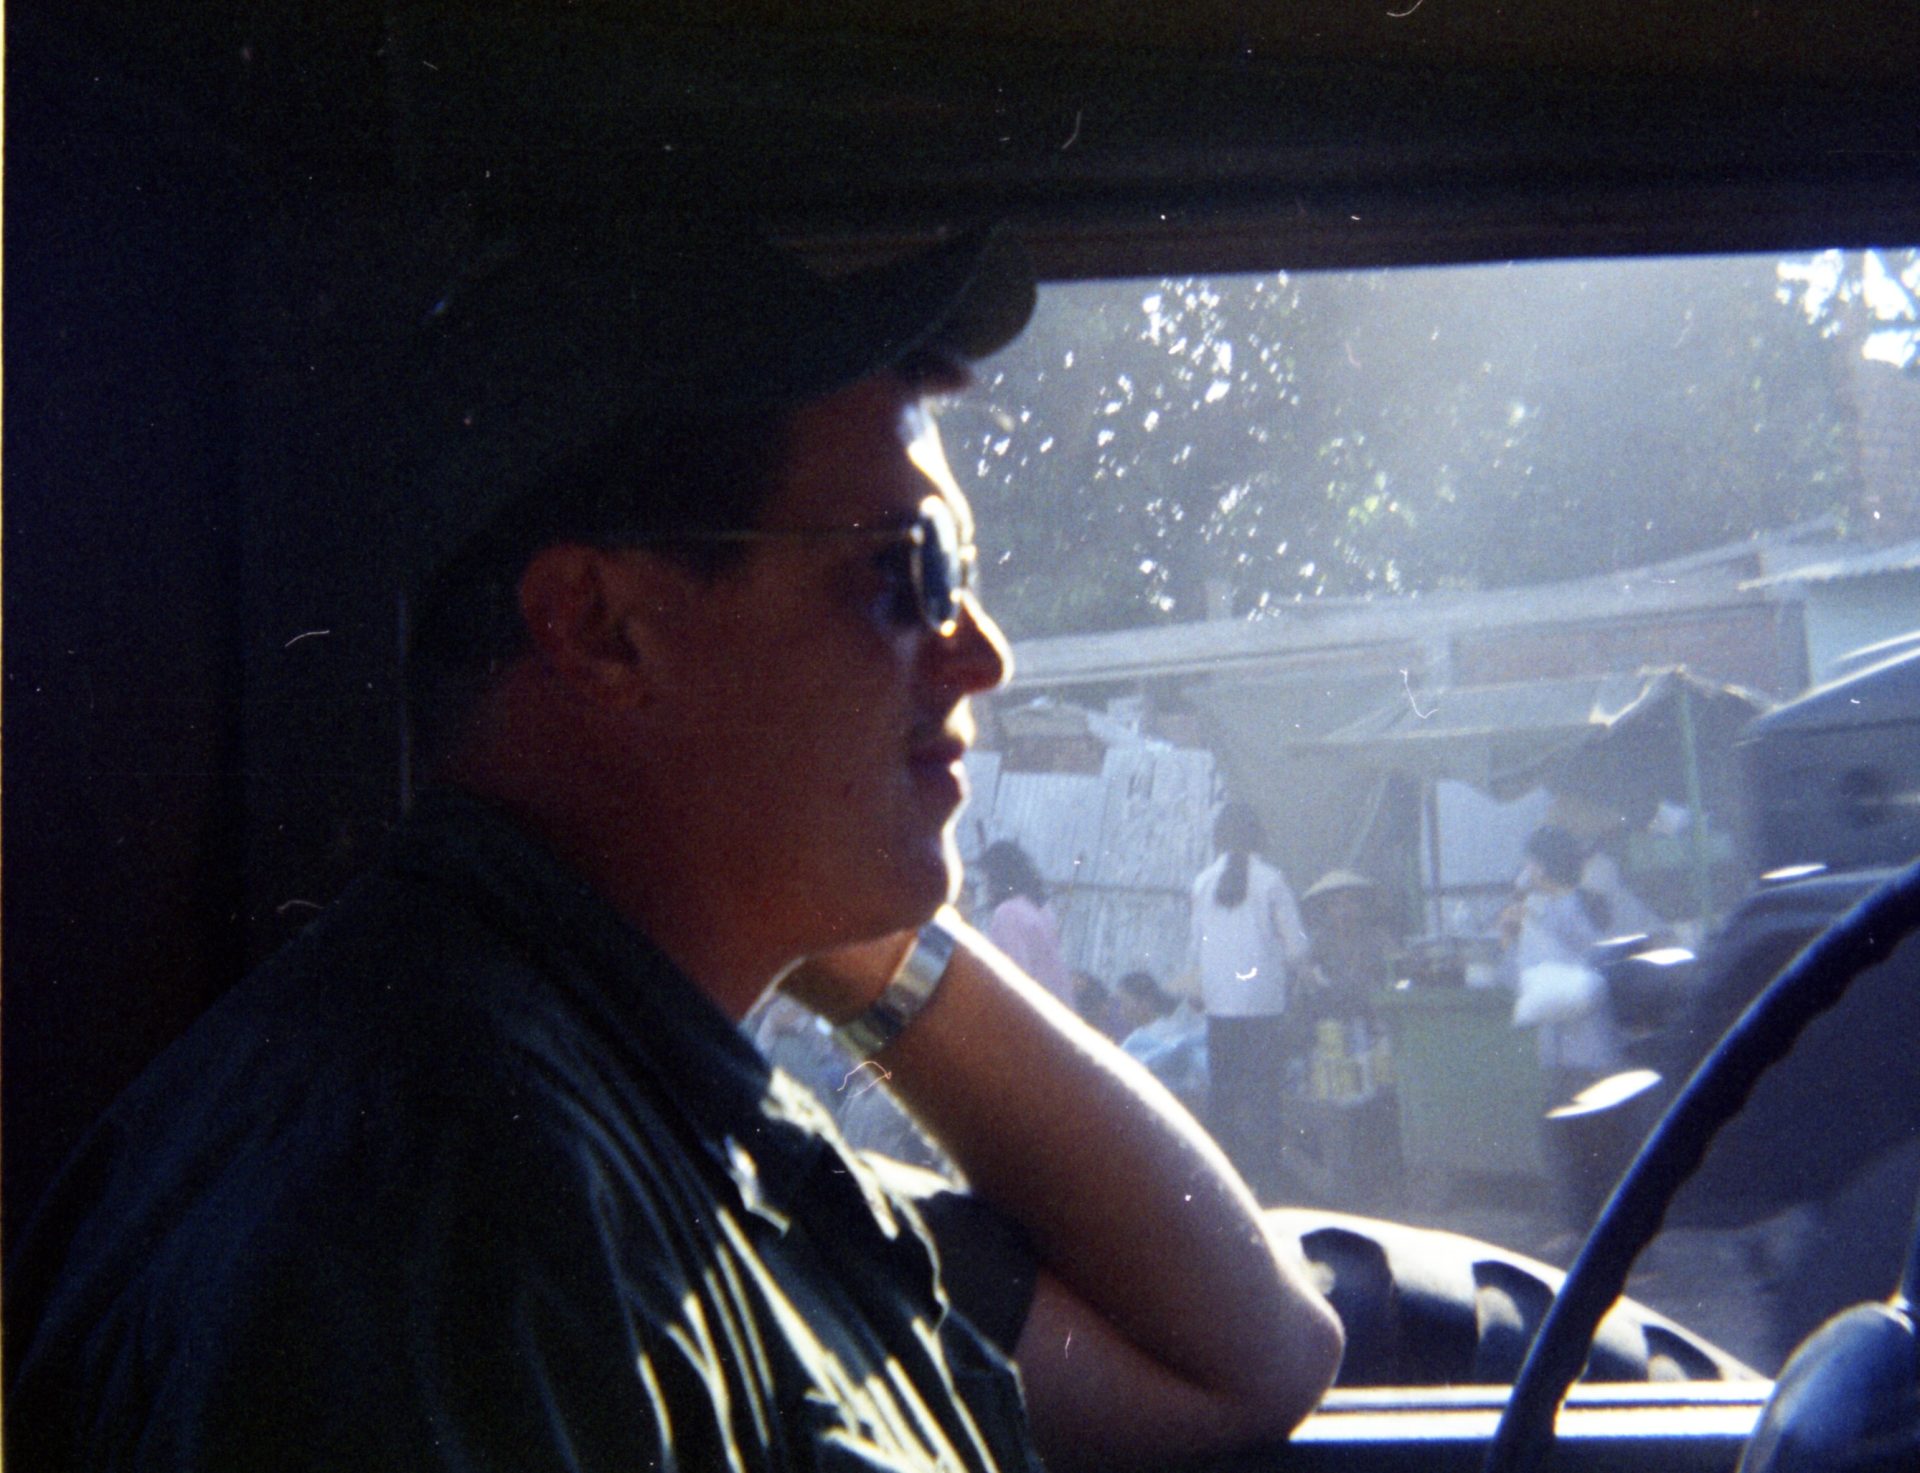 A photograph of Dennis Boyer seated in the driver's seat of a vehicle.